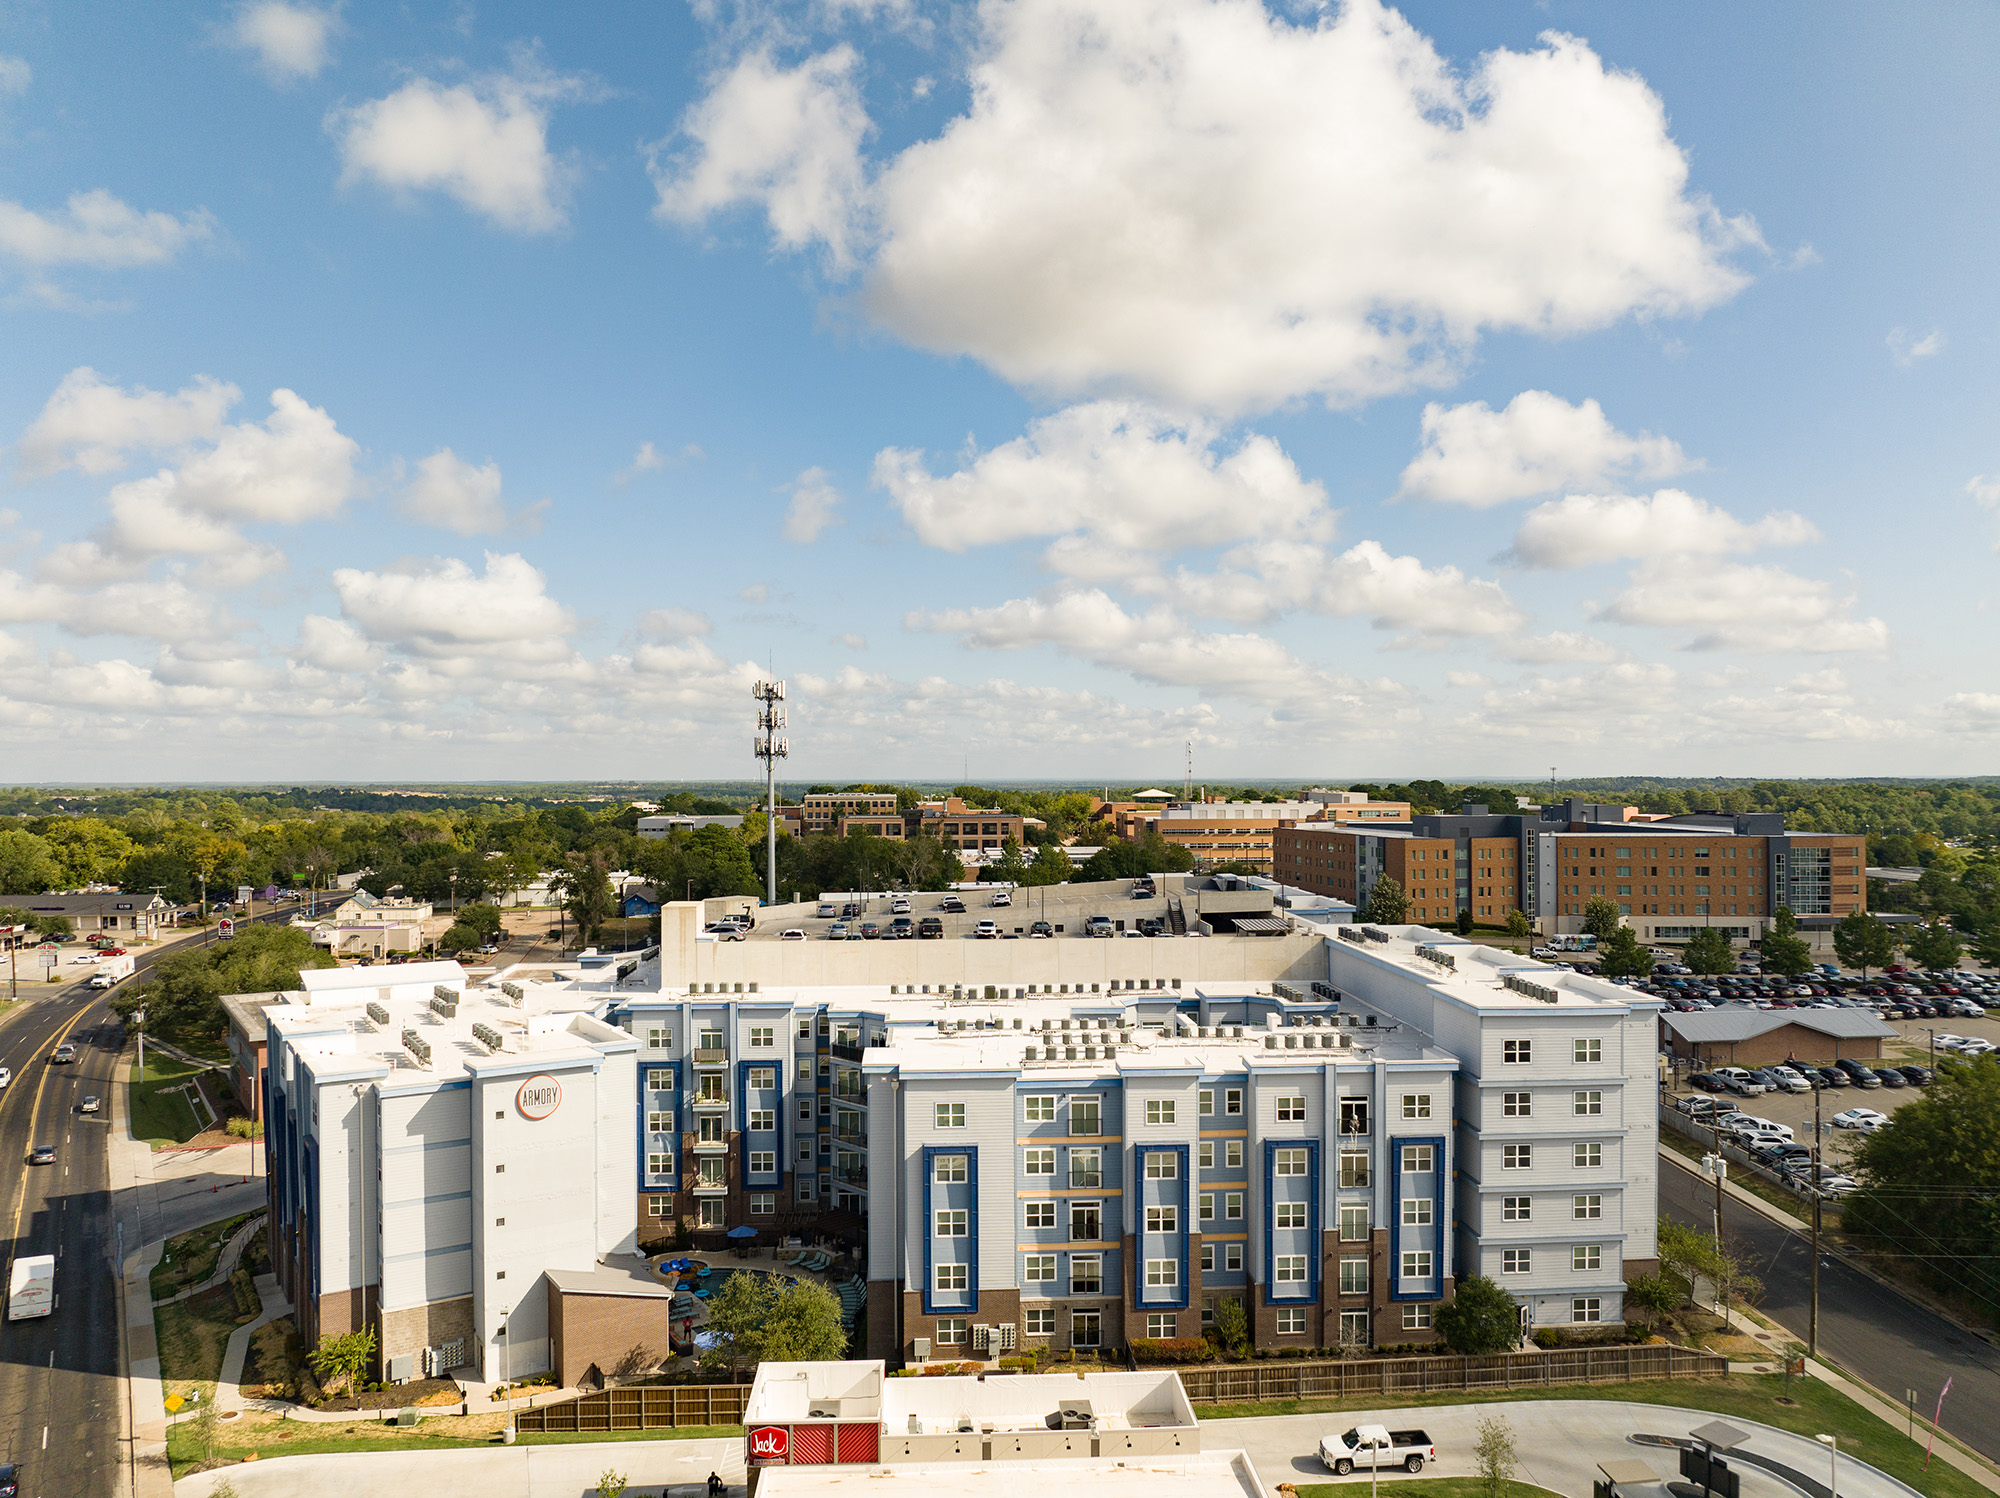 The Armory student housing community aerial view